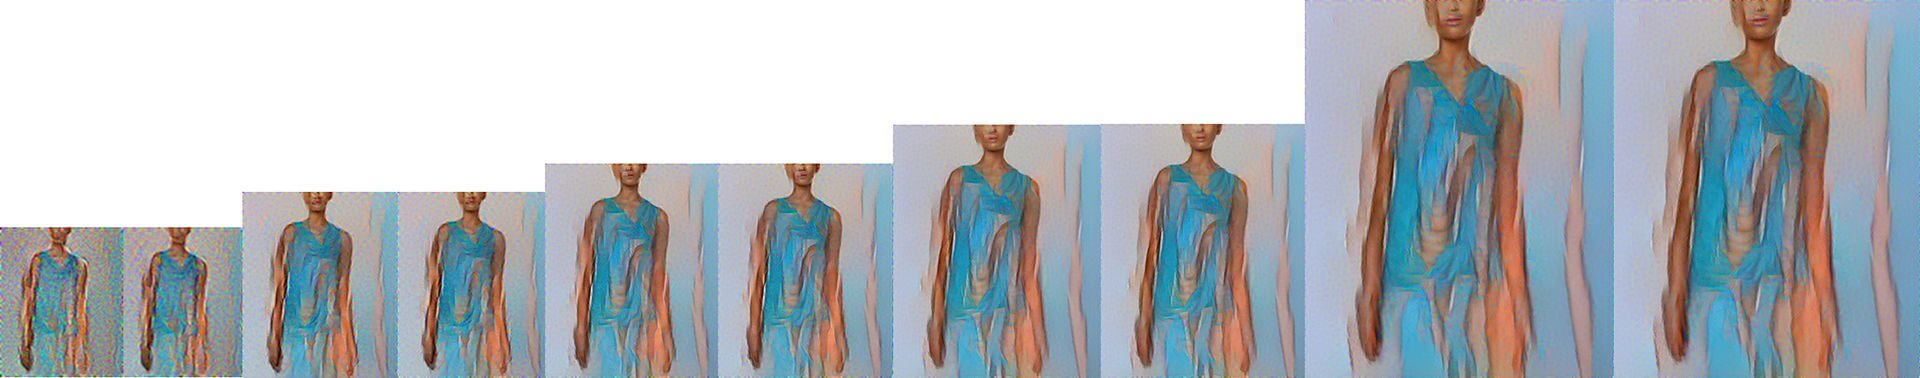 Designing Apparel with Neural Style Transfer